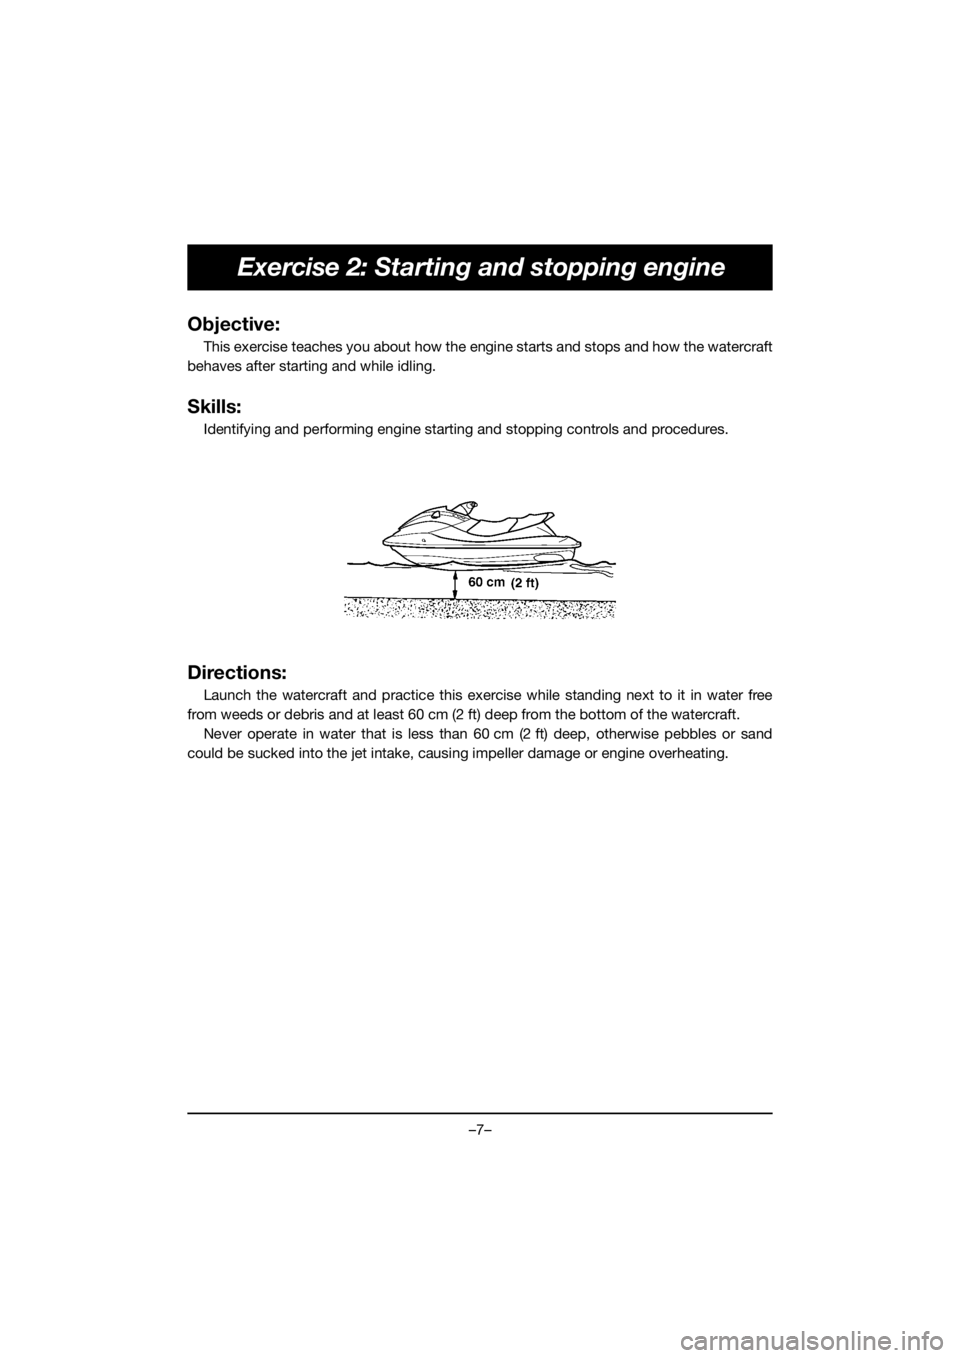 YAMAHA VX DELUXE 2020  Manual de utilização (in Portuguese) –7–
Exercise 2: Starting and stopping engine
Objective:
This exercise teaches you about how the engine starts and stops and how the watercraft
behaves after starting and while idling.
Skills:
Iden